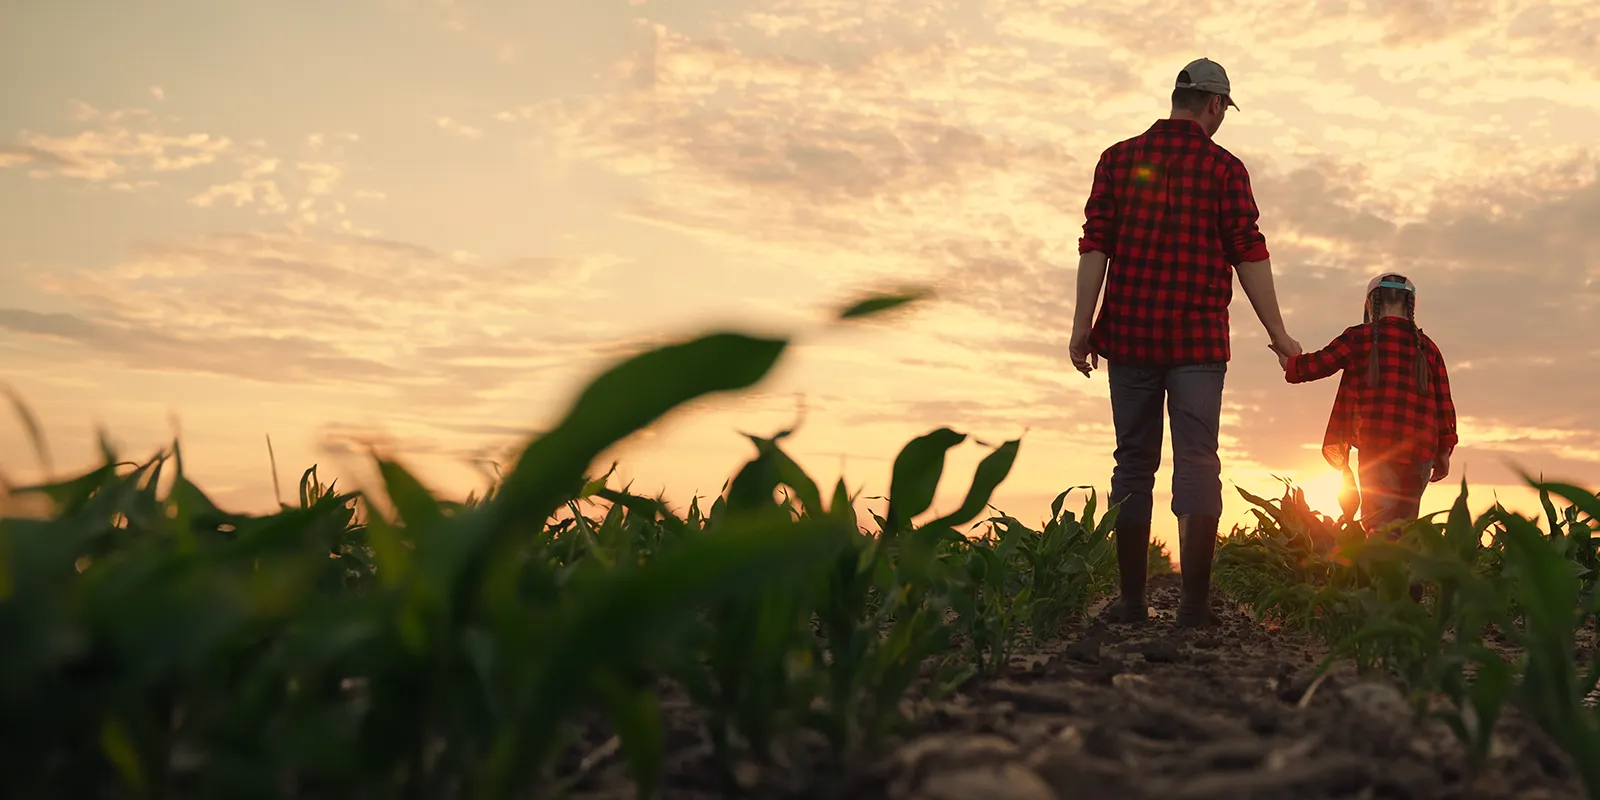 father and daughter walking through a farm field at sunset